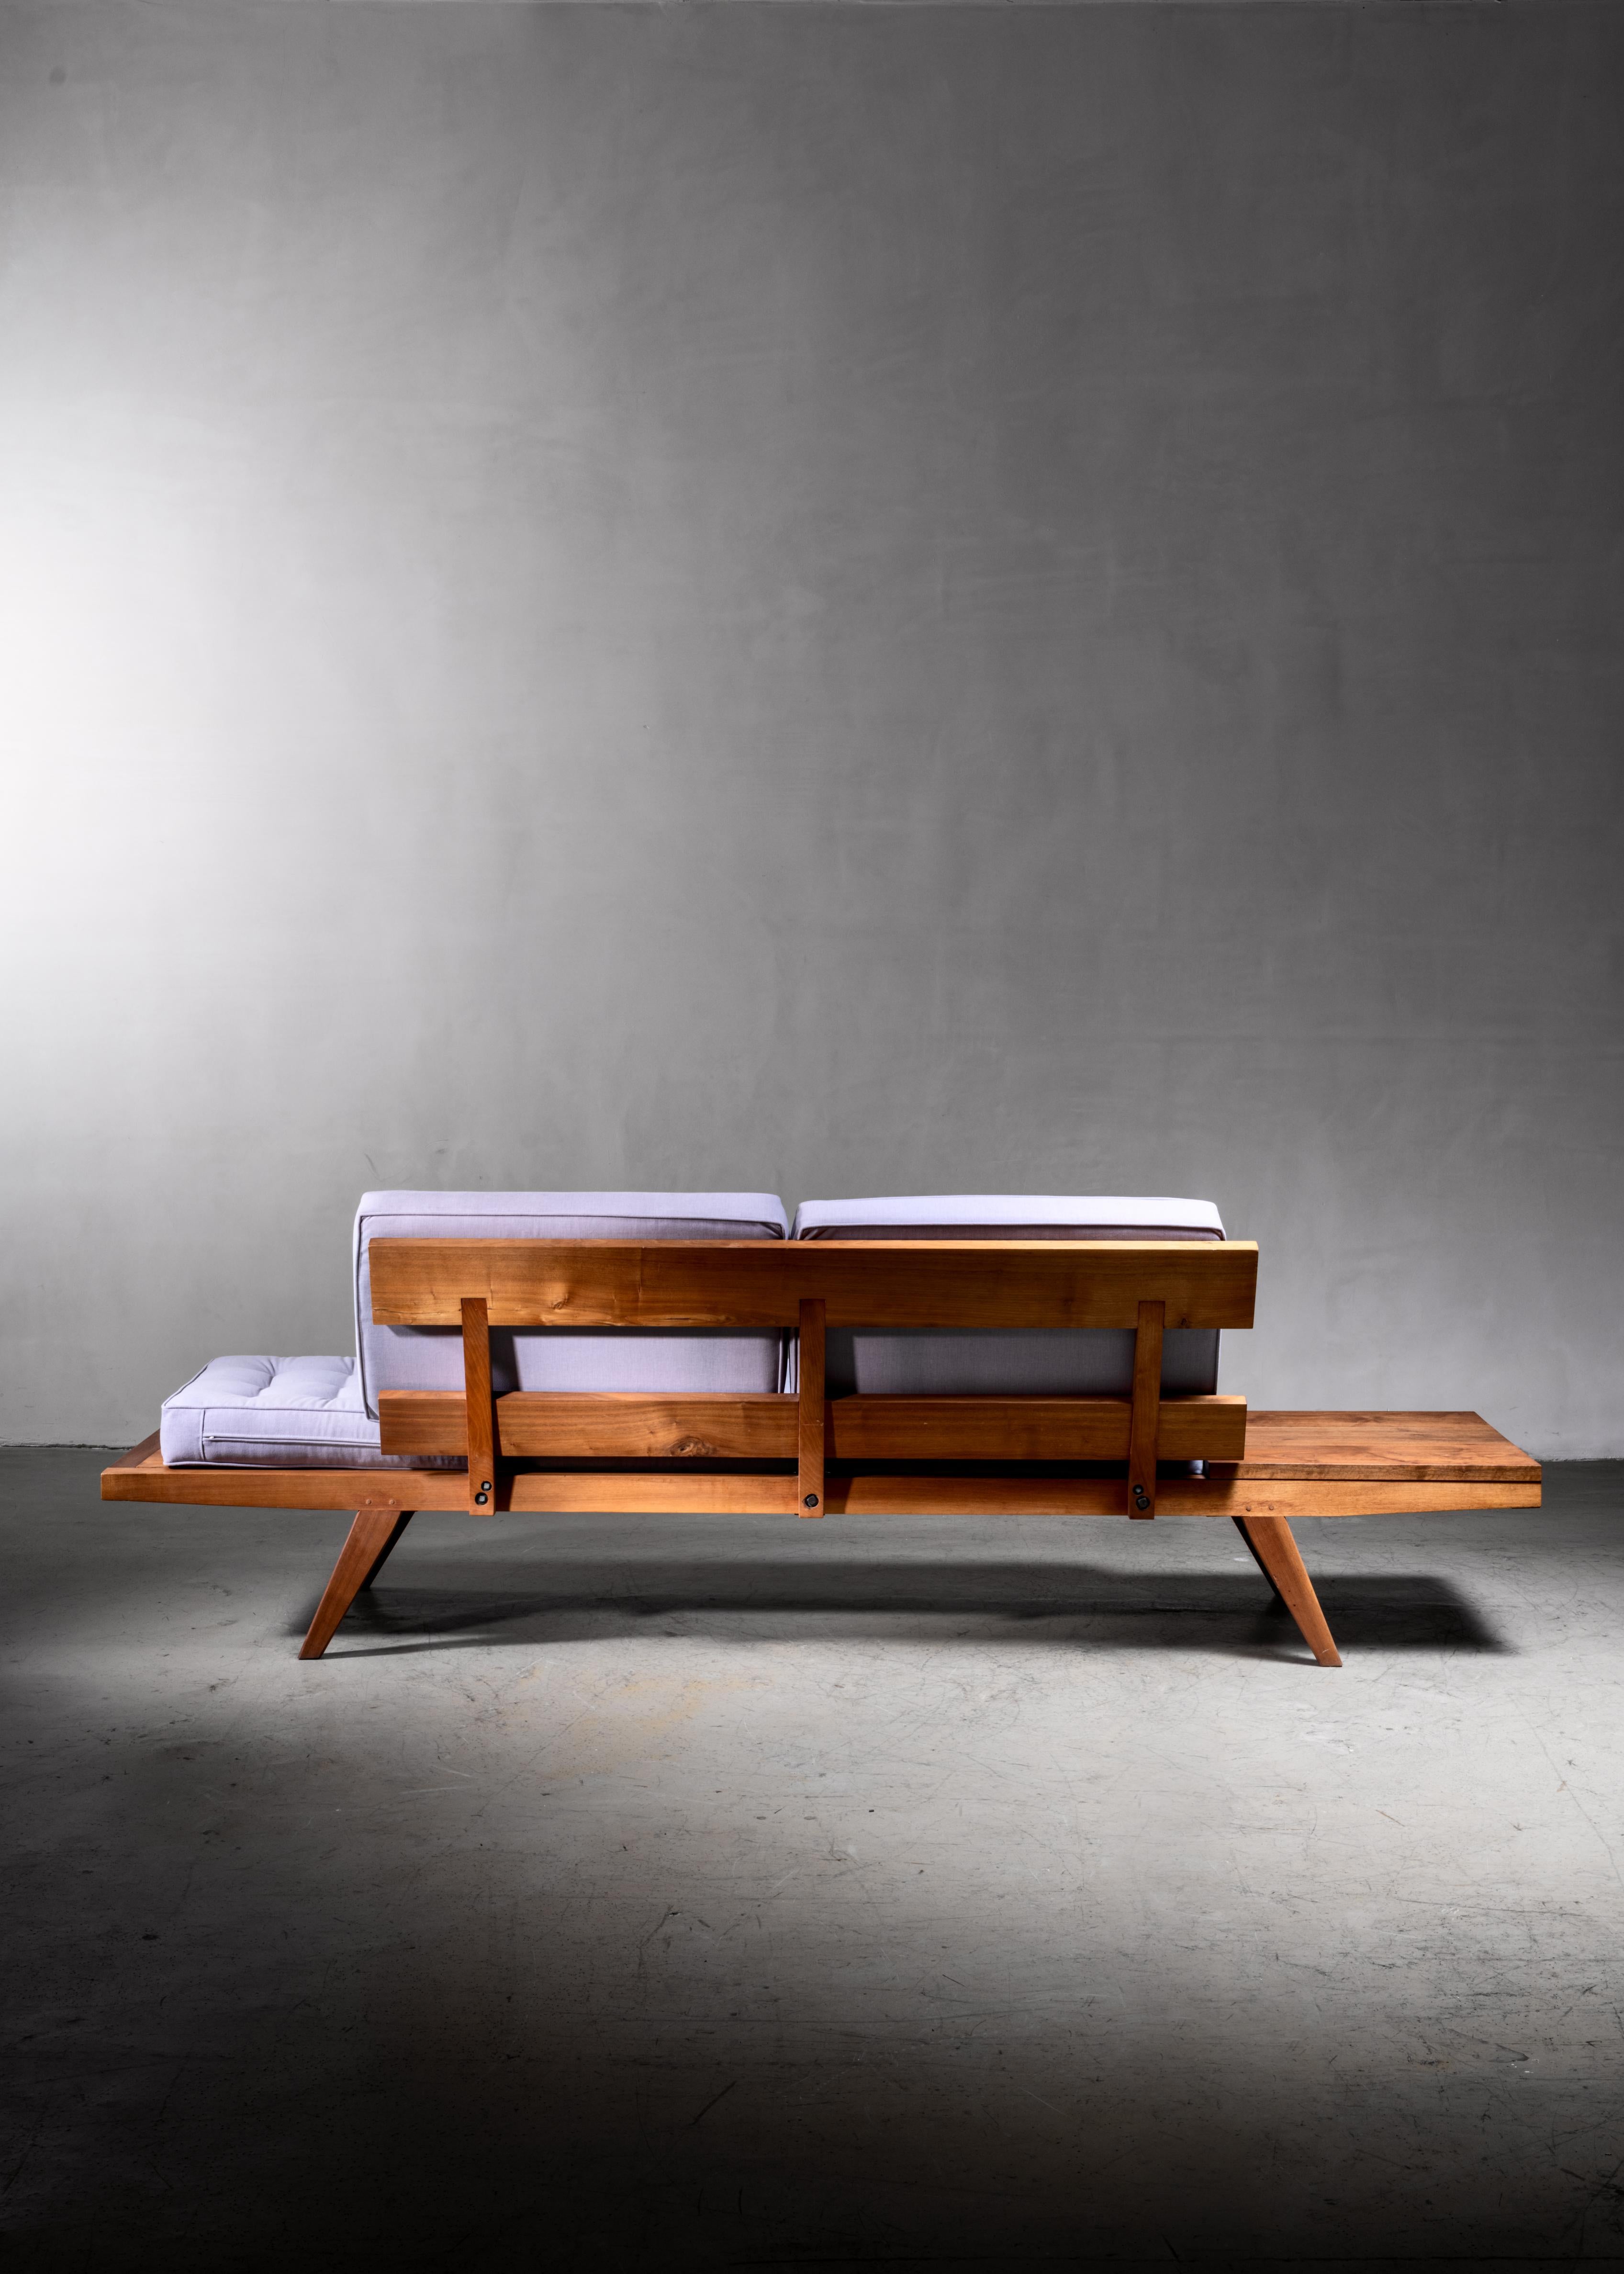 Mid-20th Century Rude Osolnik Studio Crafted Wooden Sofa, USA, 1960s For Sale